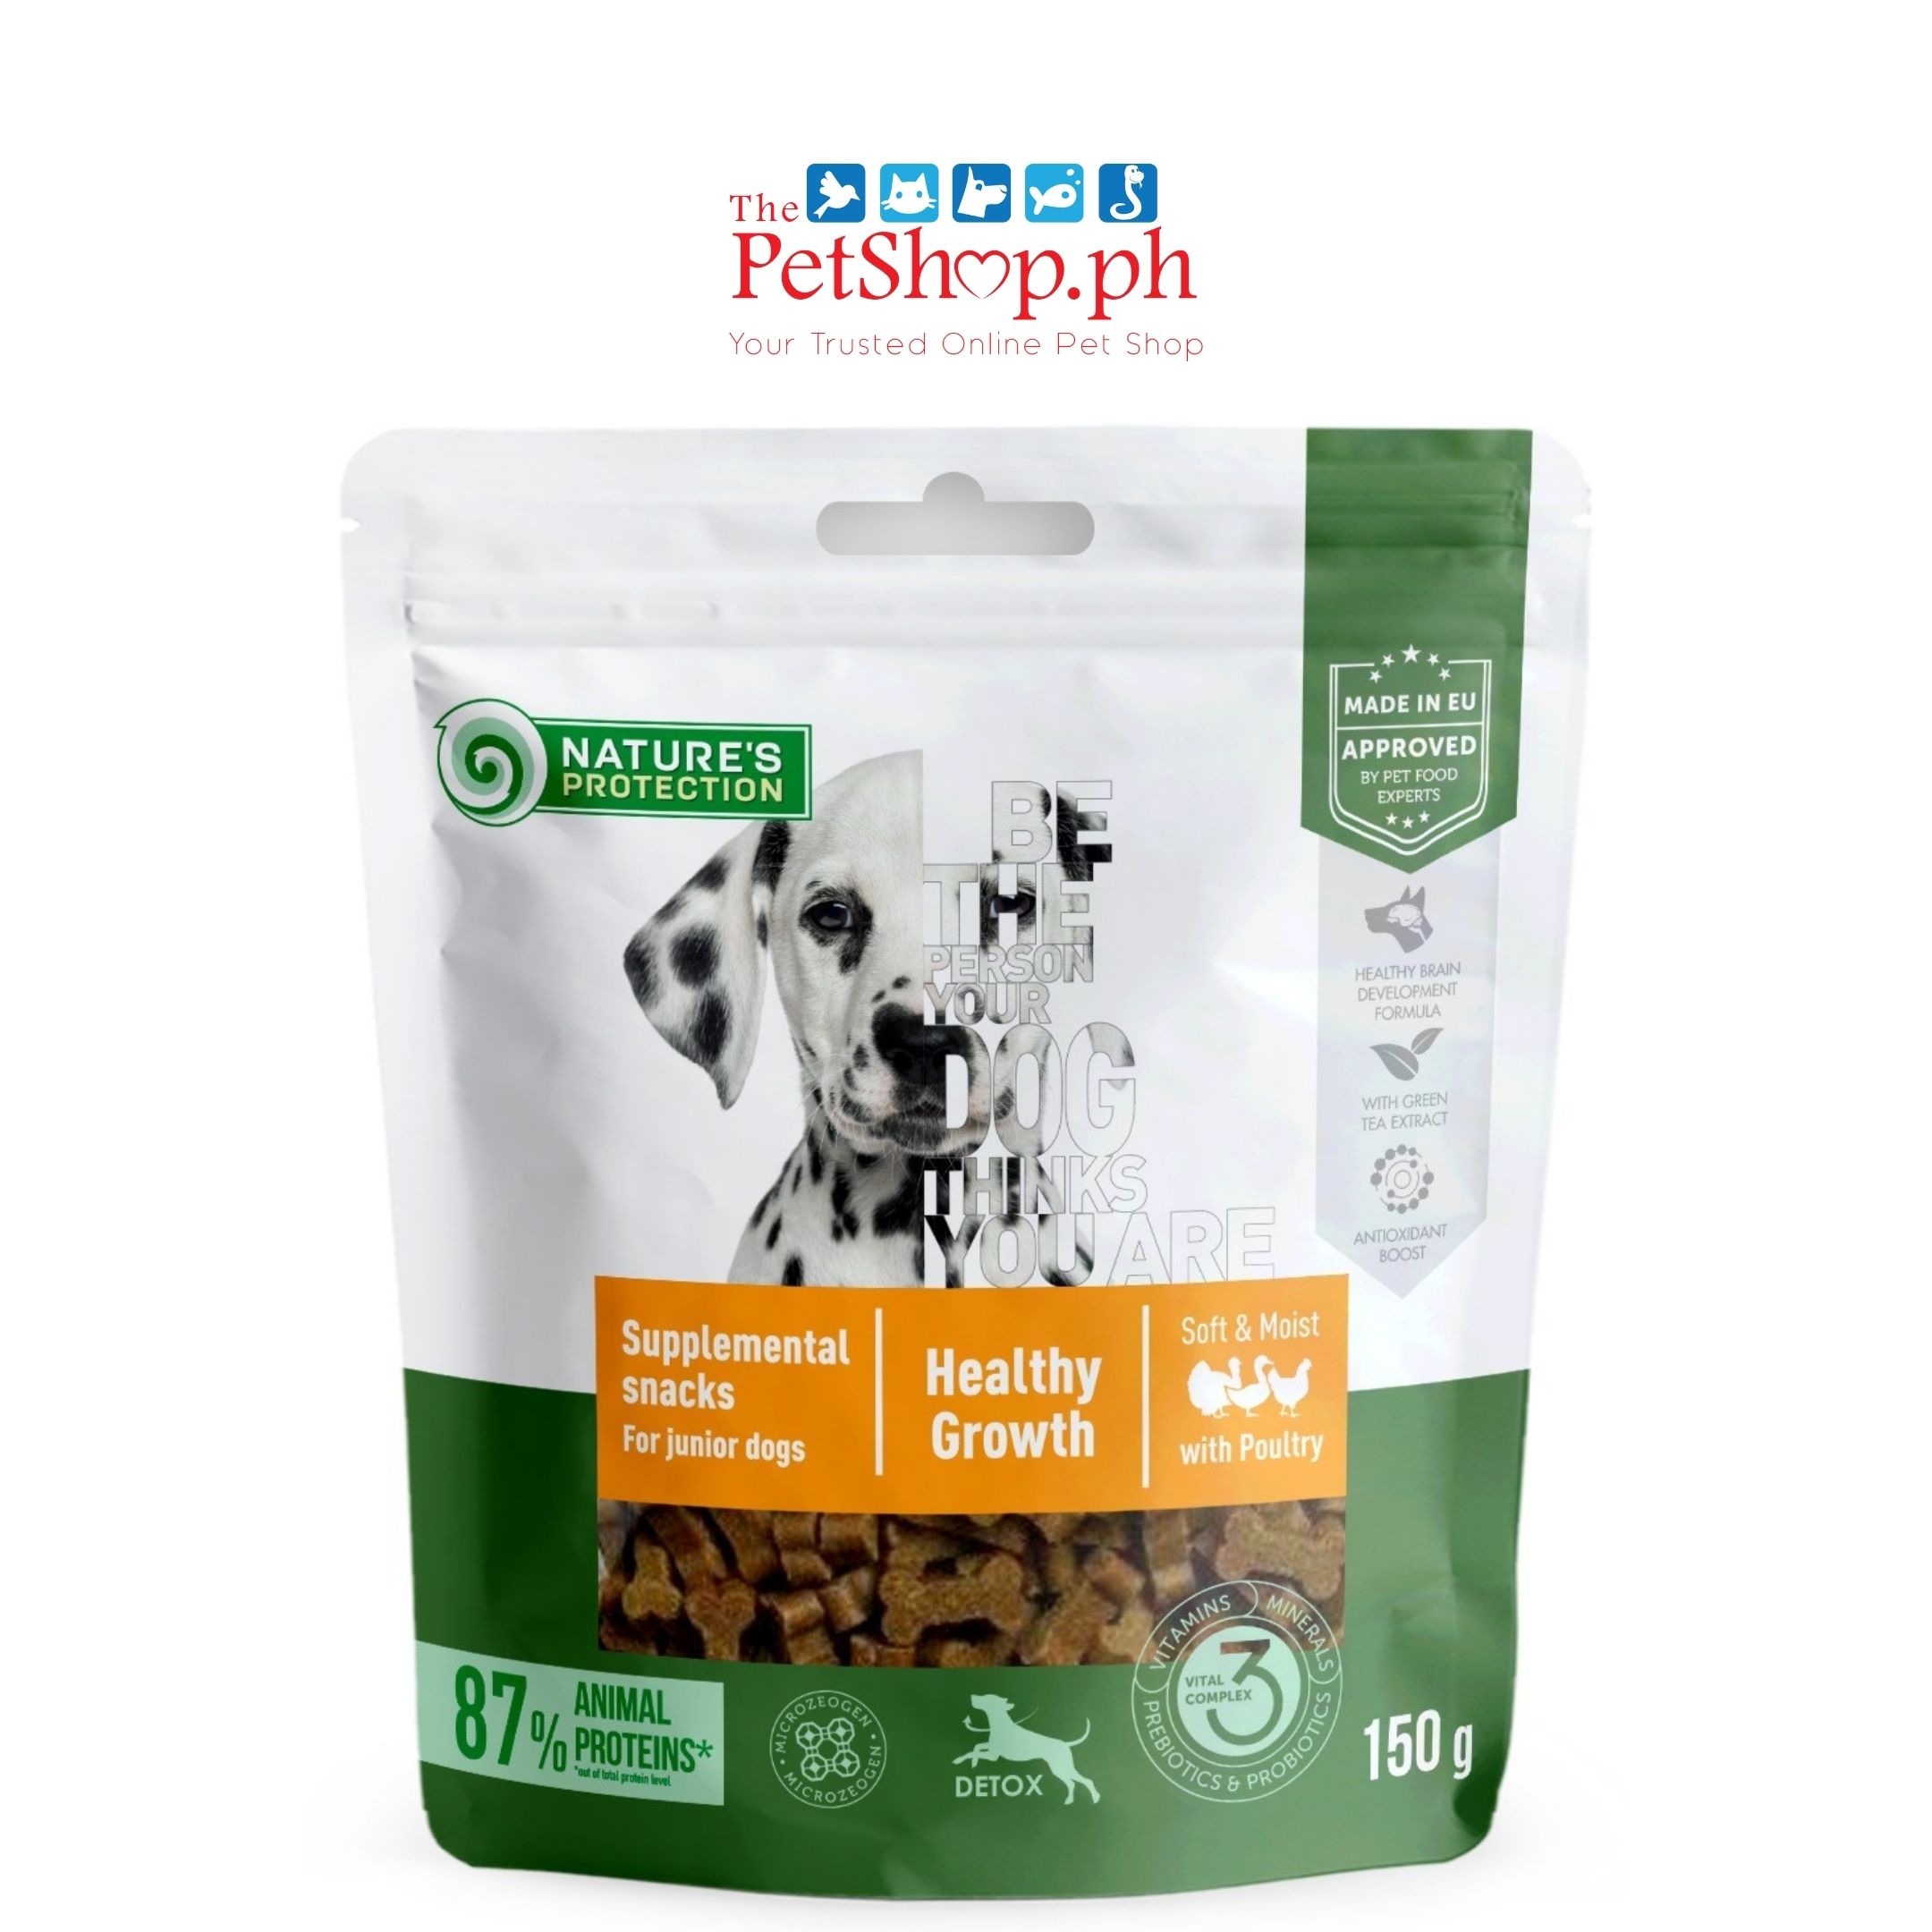 Nature's Protection Supplemental Snack for Junior Dogs - 150g	